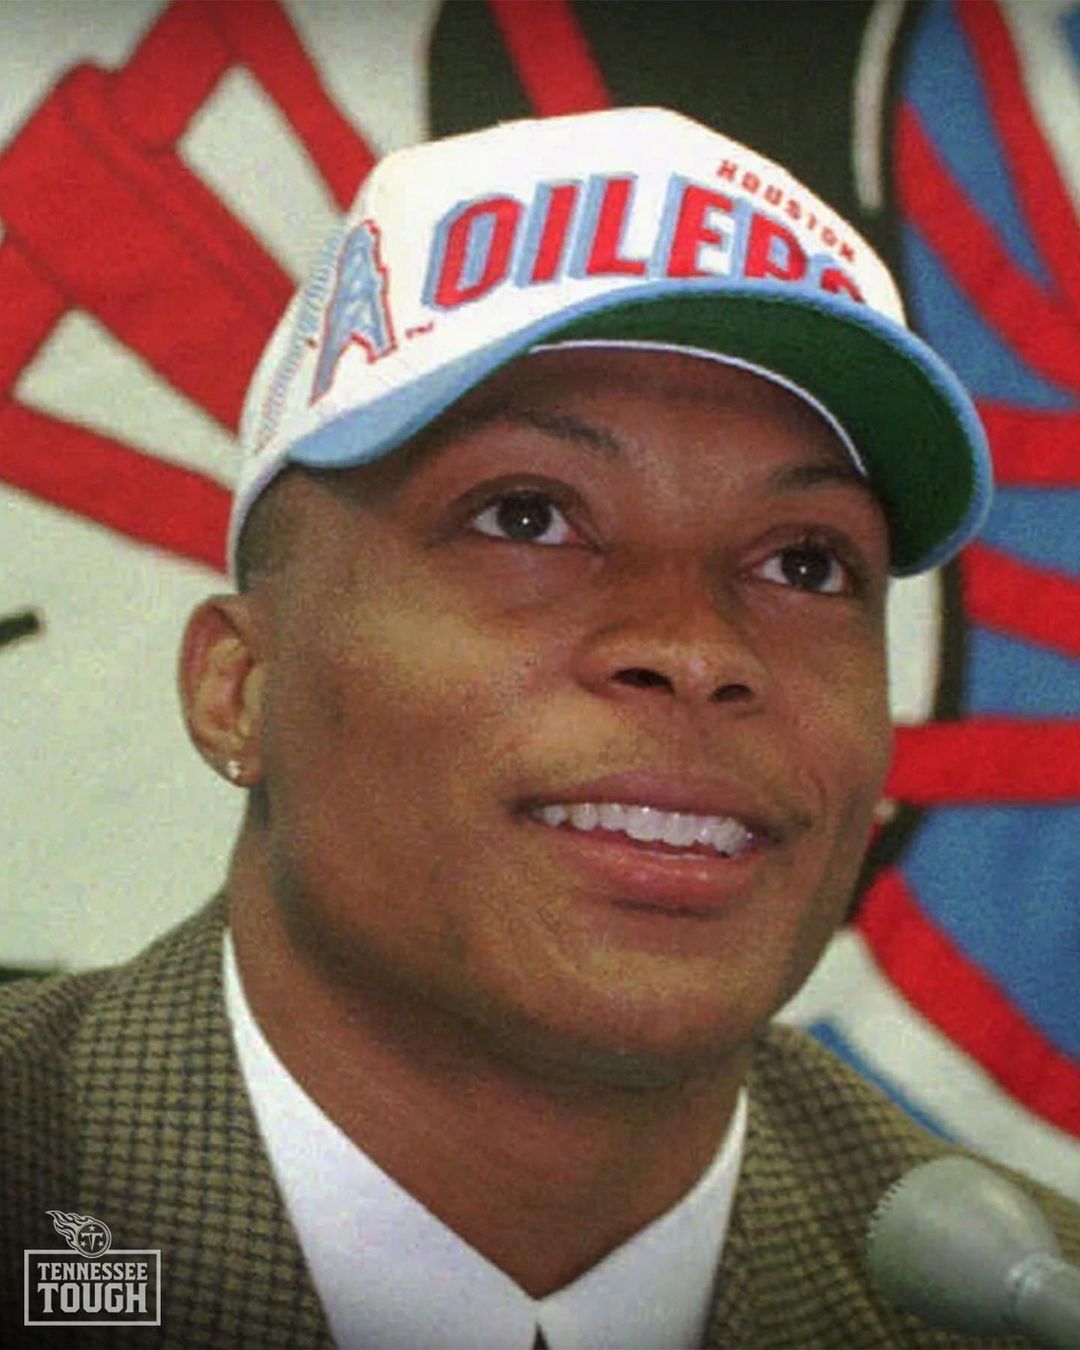 On this day in 1996, the Houston Oilers select RB @eddiegeorge2727 from @ohiosta...